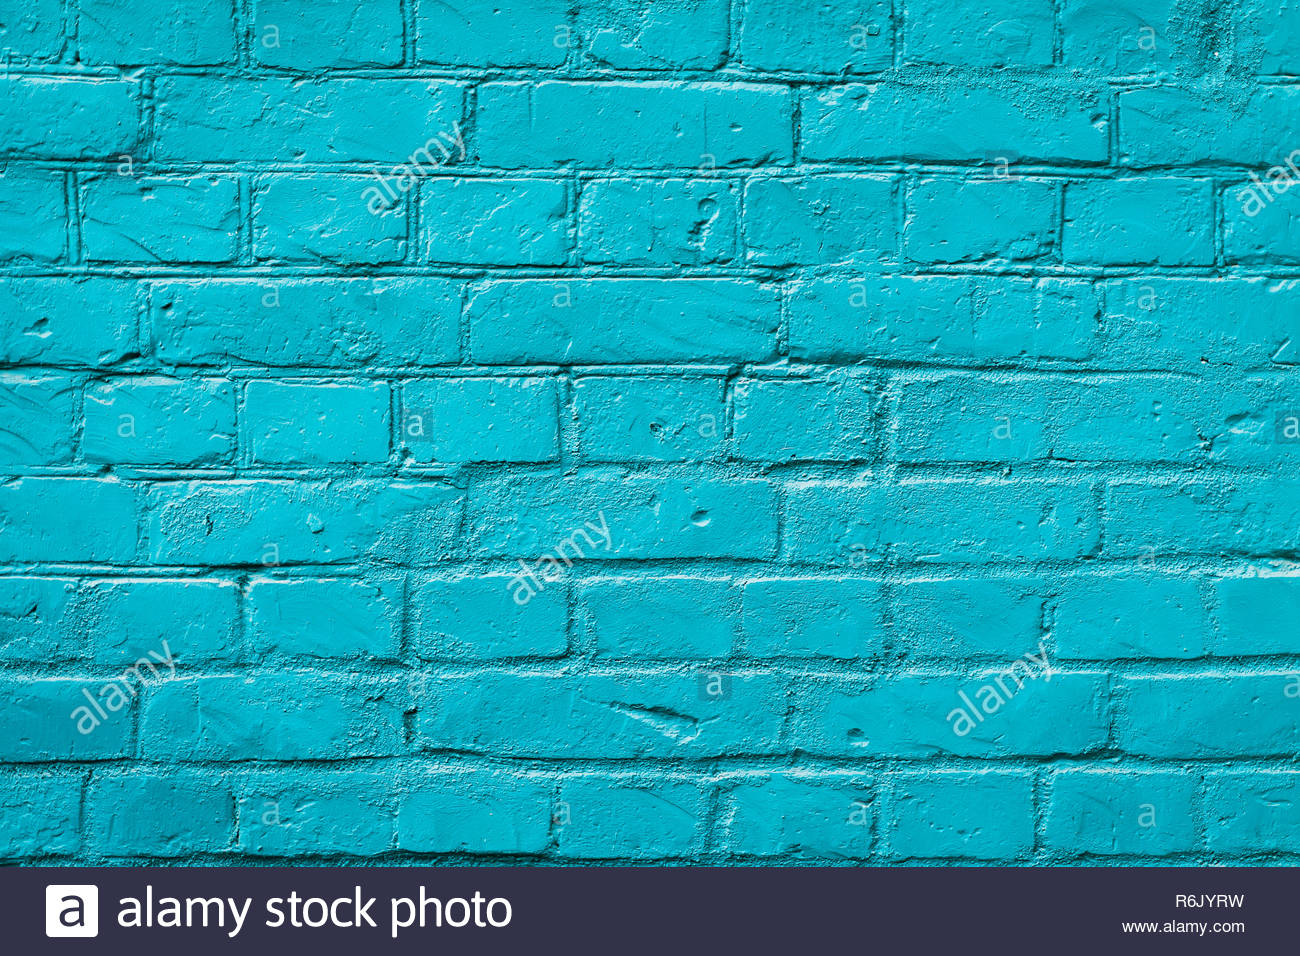 Painted Brick Wall Blue Color Urban Background Horizontal